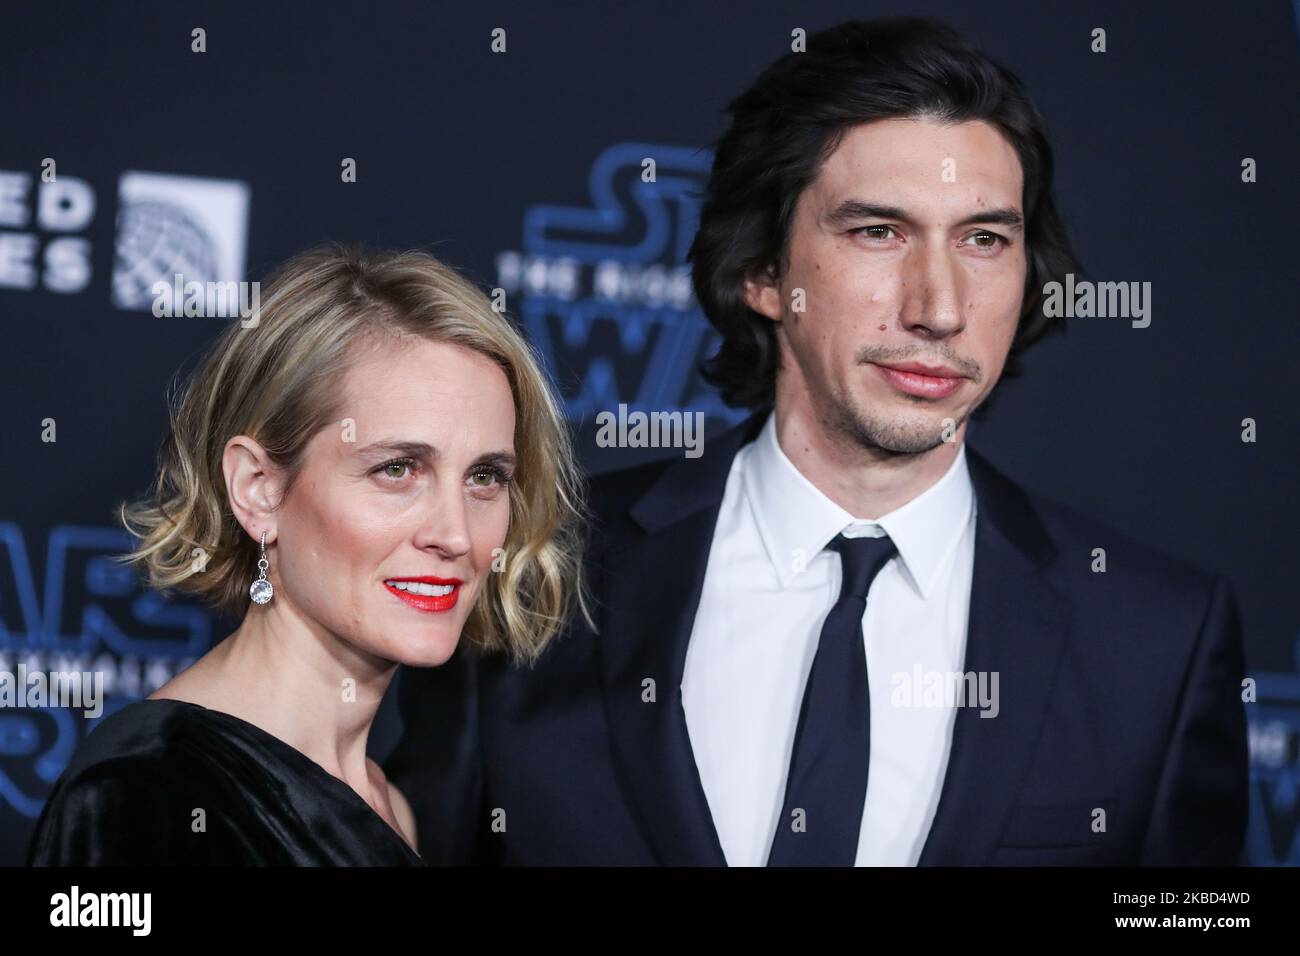 HOLLYWOOD, LOS ANGELES, CALIFORNIA, USA - DECEMBER 16: Joanne Tucker and Adam Driver arrive at the World Premiere Of Disney's 'Star Wars: The Rise Of Skywalker' held at the El Capitan Theatre on December 16, 2019 in Hollywood, Los Angeles, California, United States. (Photo by Xavier Collin/Image Press Agency/NurPhoto) Stock Photo